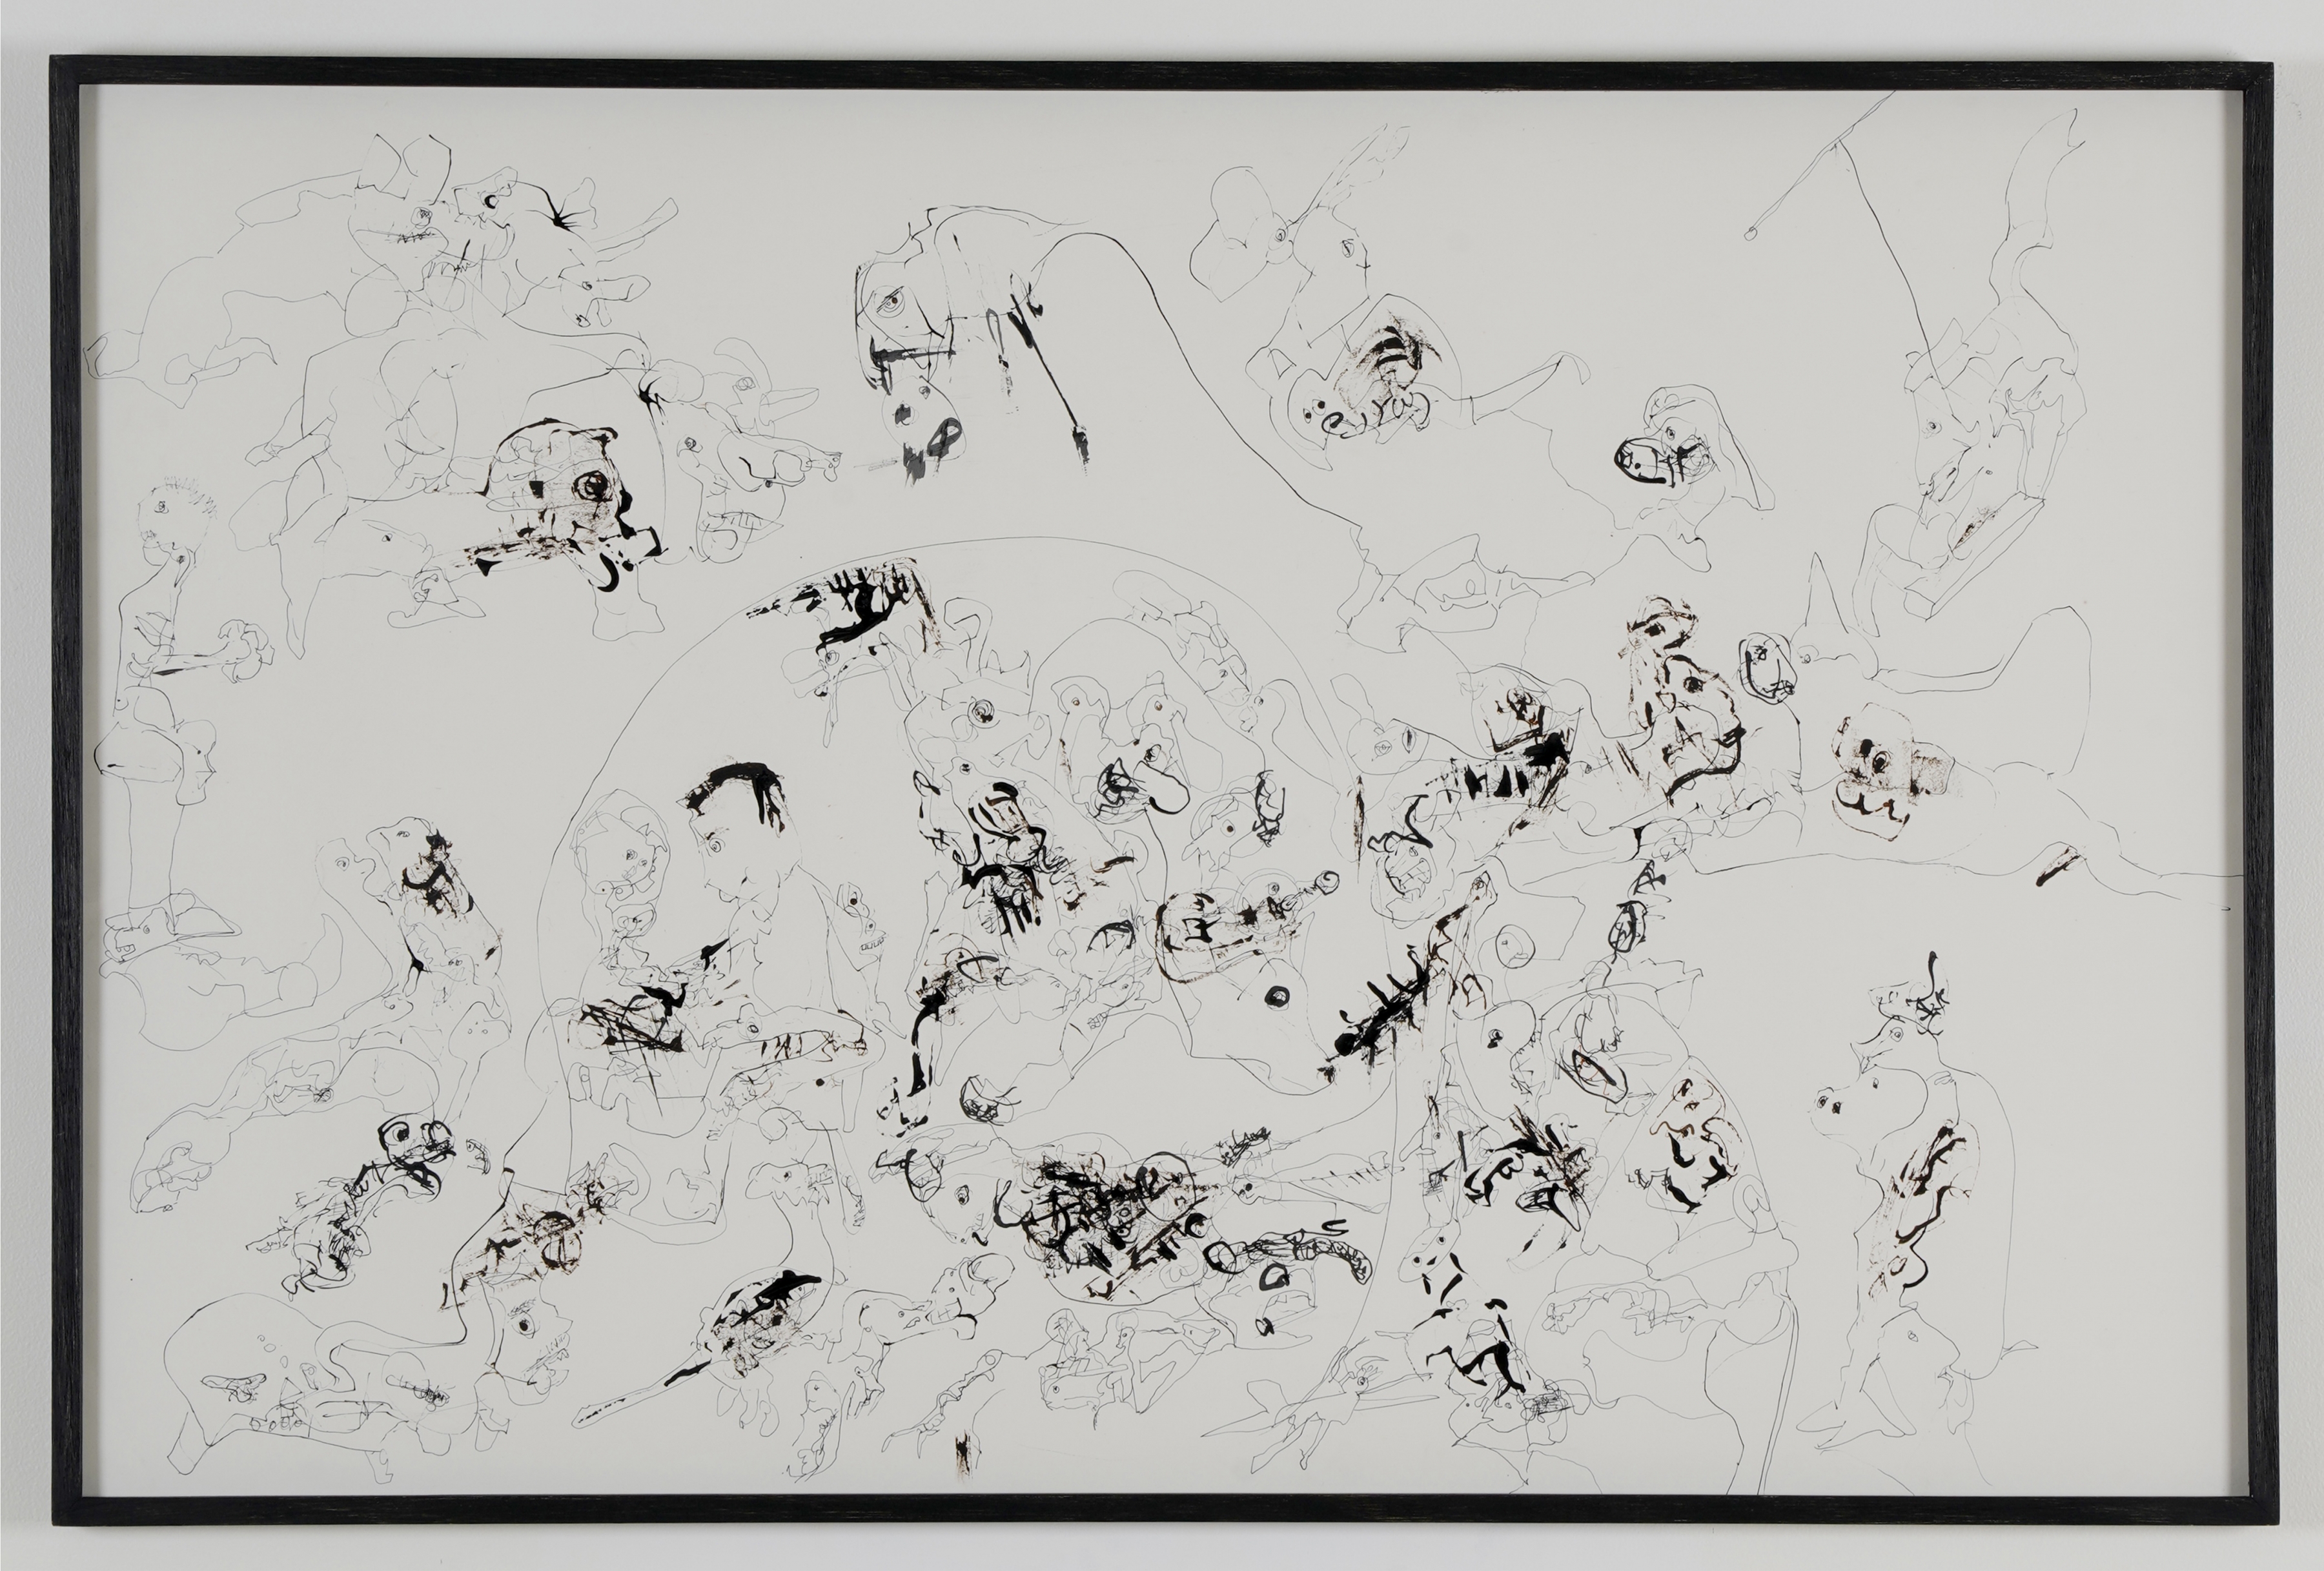 P.R. SATHEESH

Untitled (2), 2020

Indian ink on paper

26.1 x 40 in / 66.5 x 101.5 cm